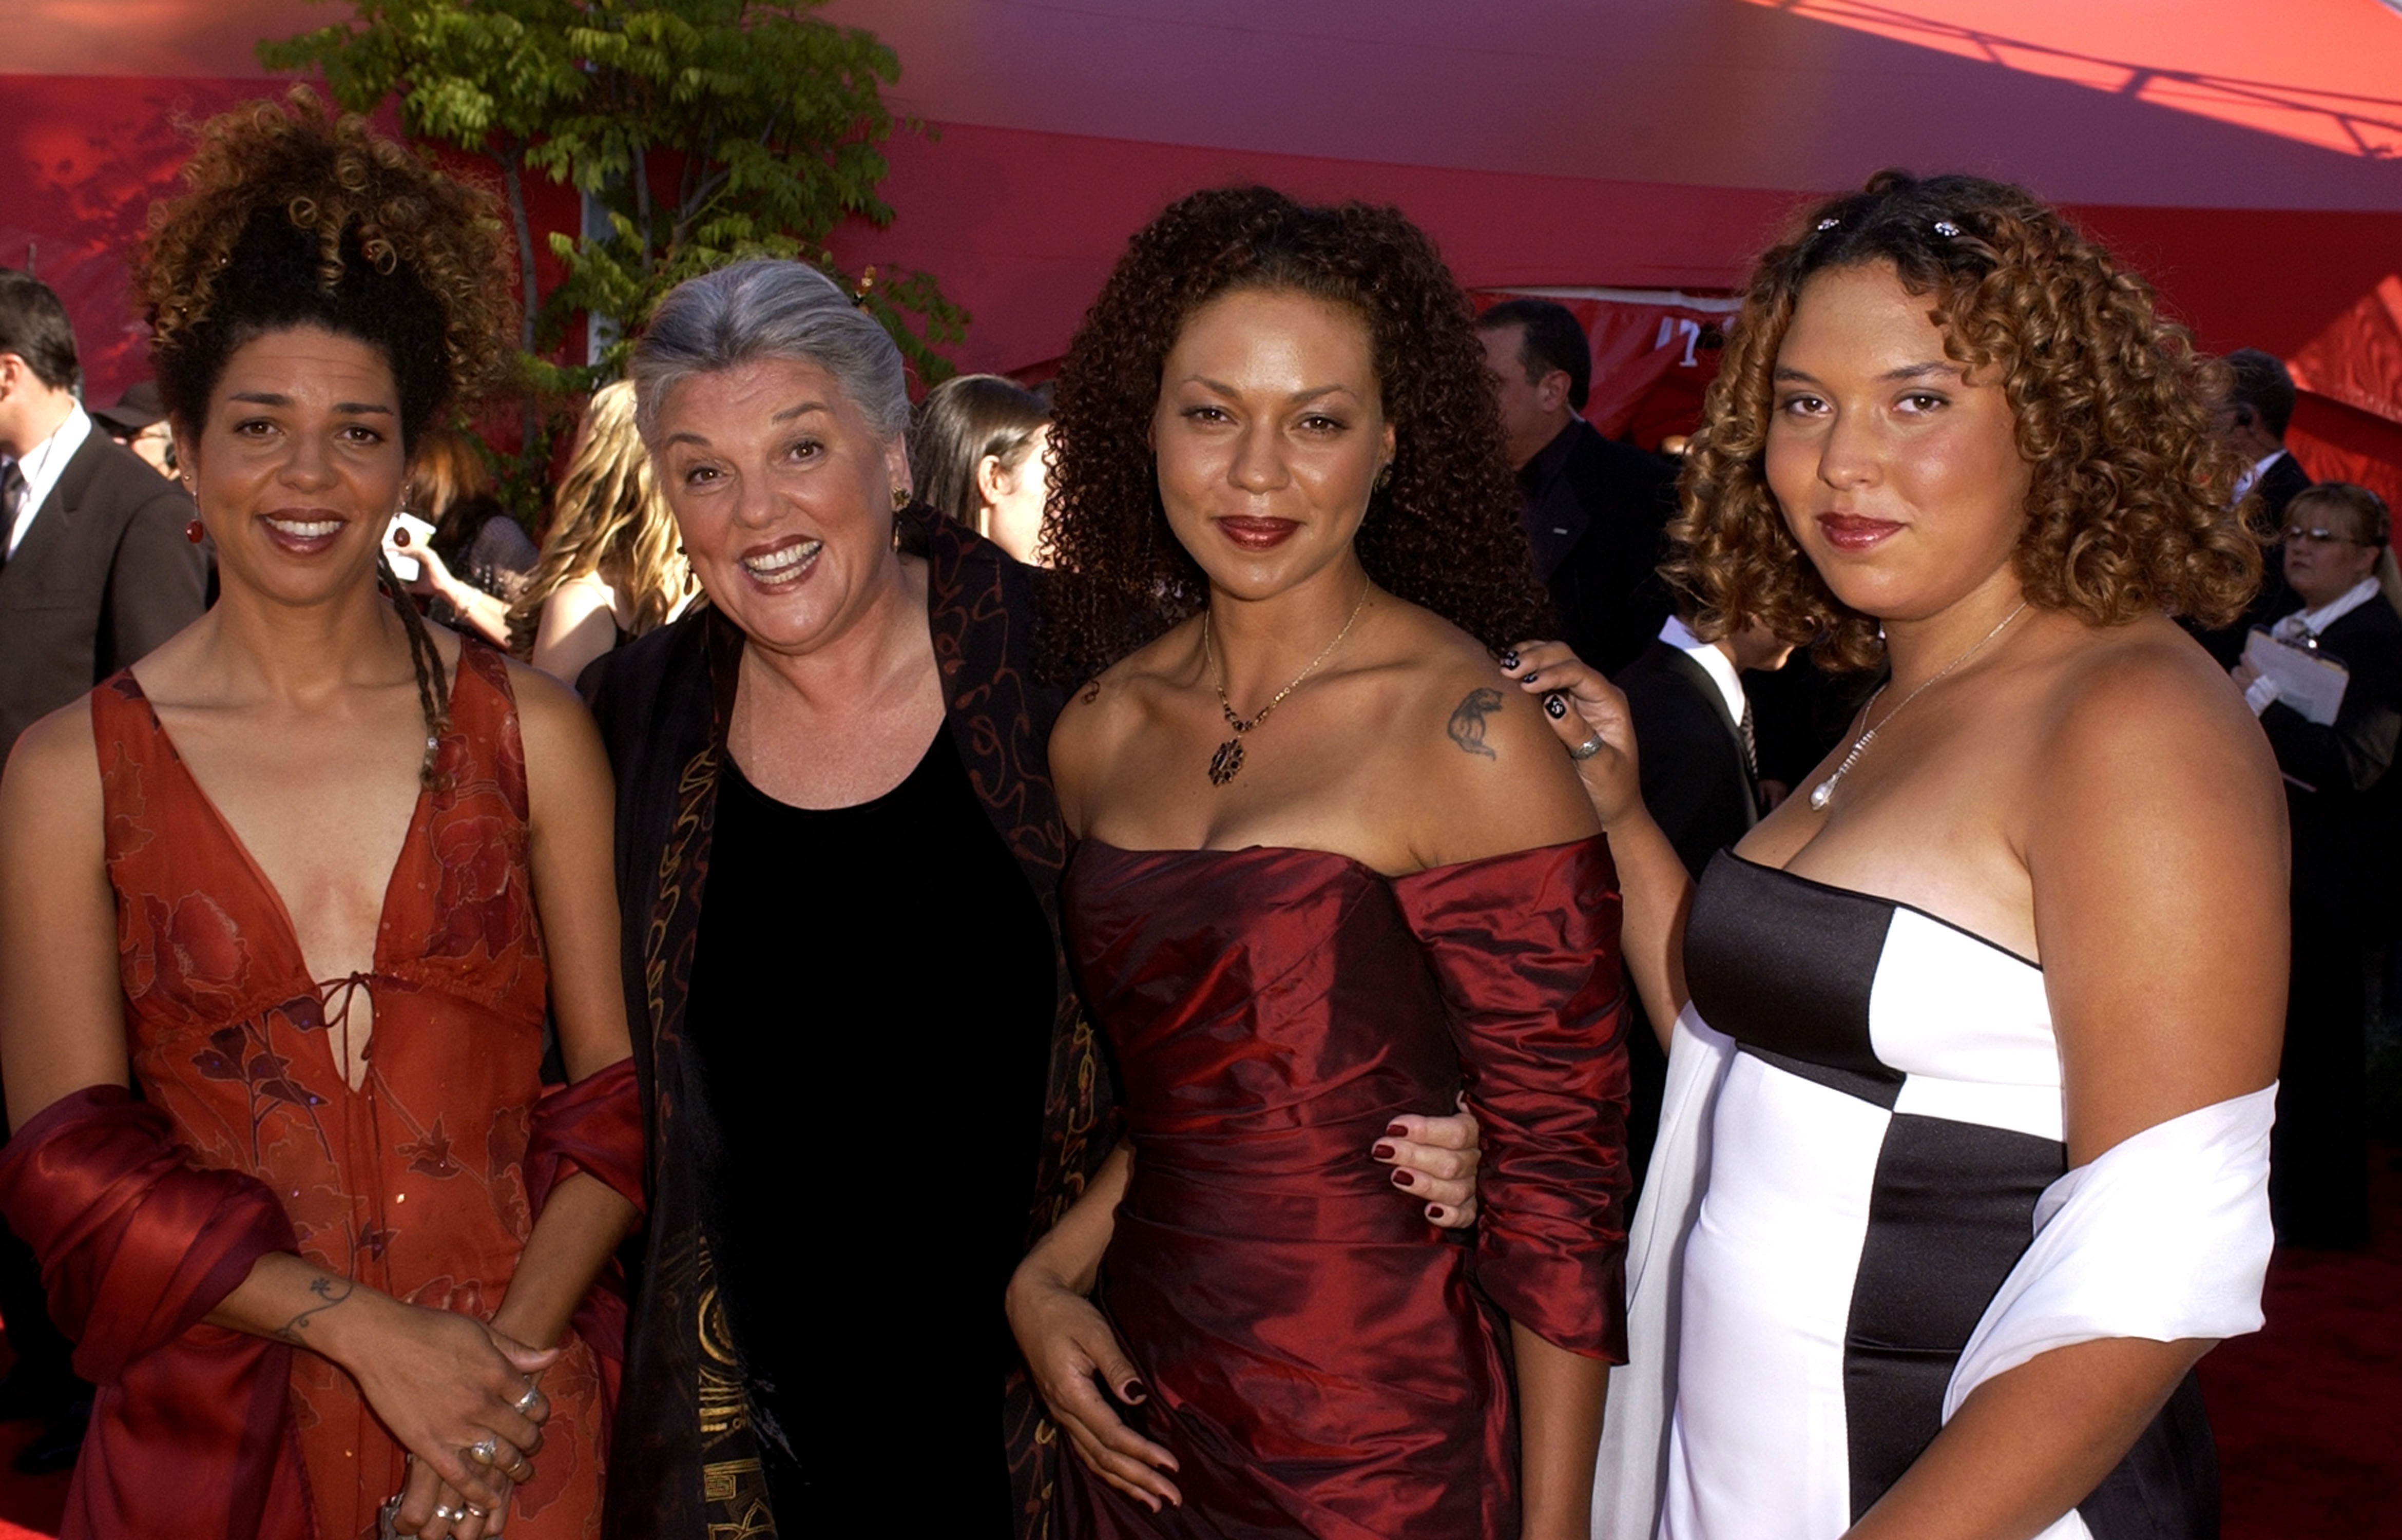 Tyne Daly with her daughters at the 54th Annual Primetime Emmy Awards in Los Angeles, California in 2002. | Source: Getty Images